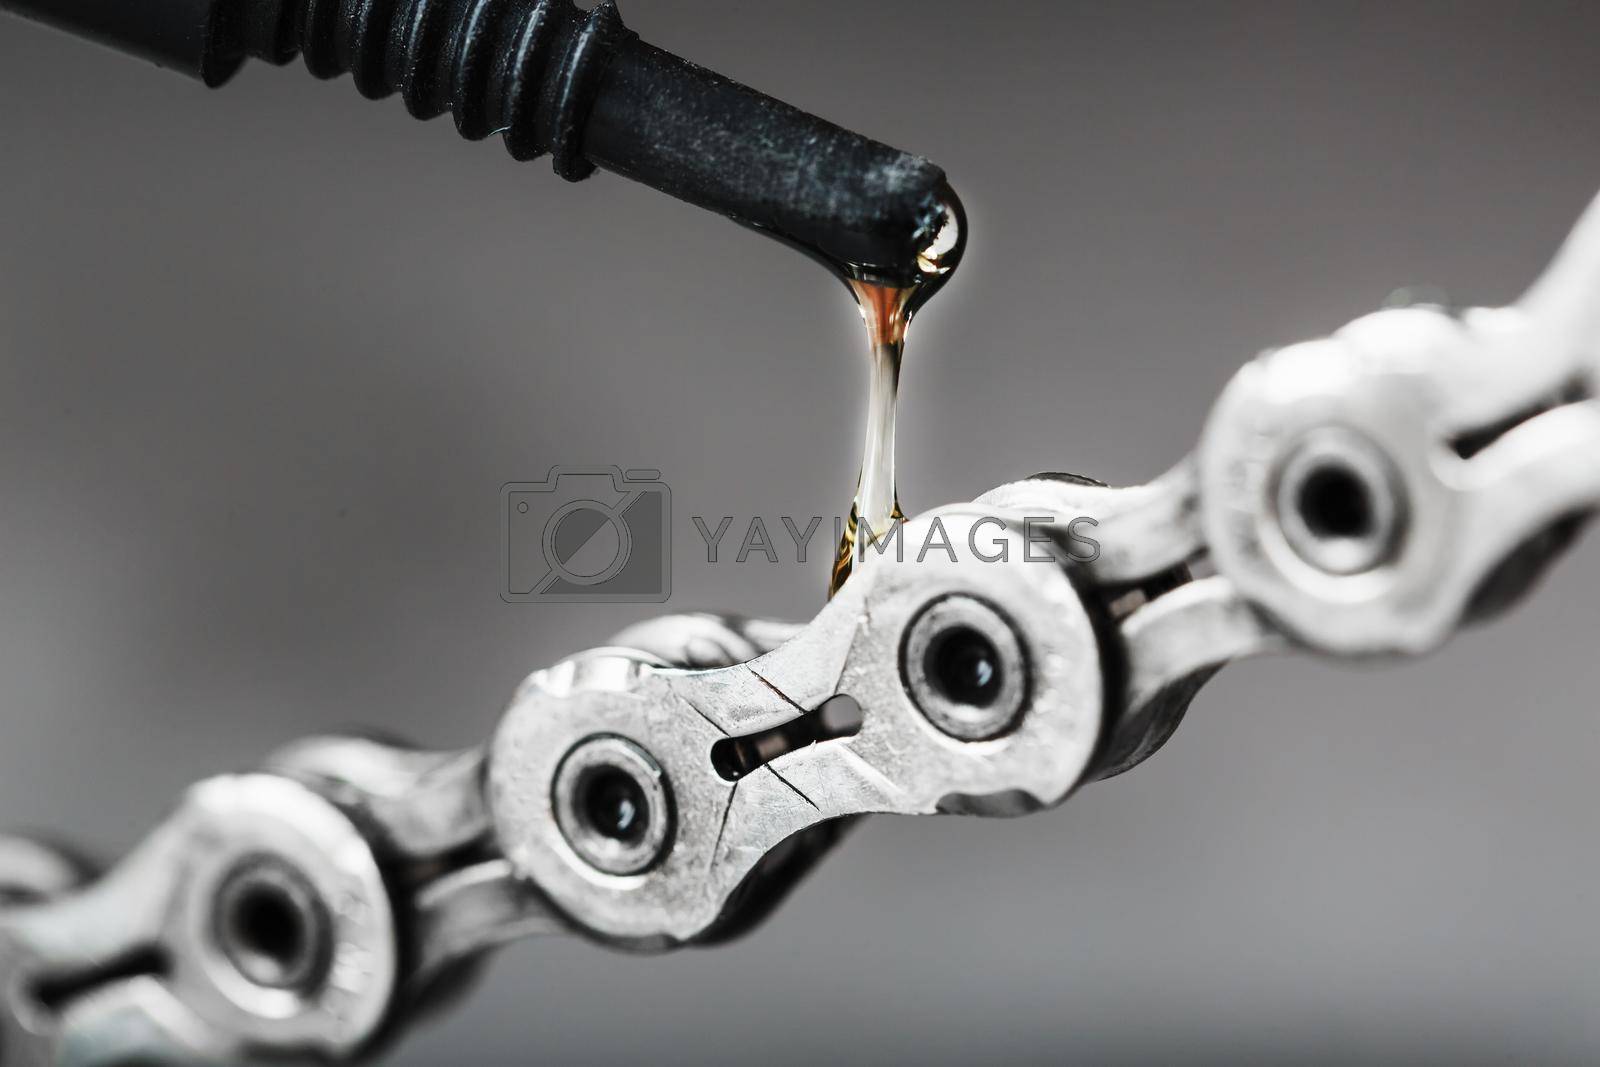 Royalty free image of Lubricating a bicycle chain with a drop of oil close-up on an isolated gray background by AlexGrec